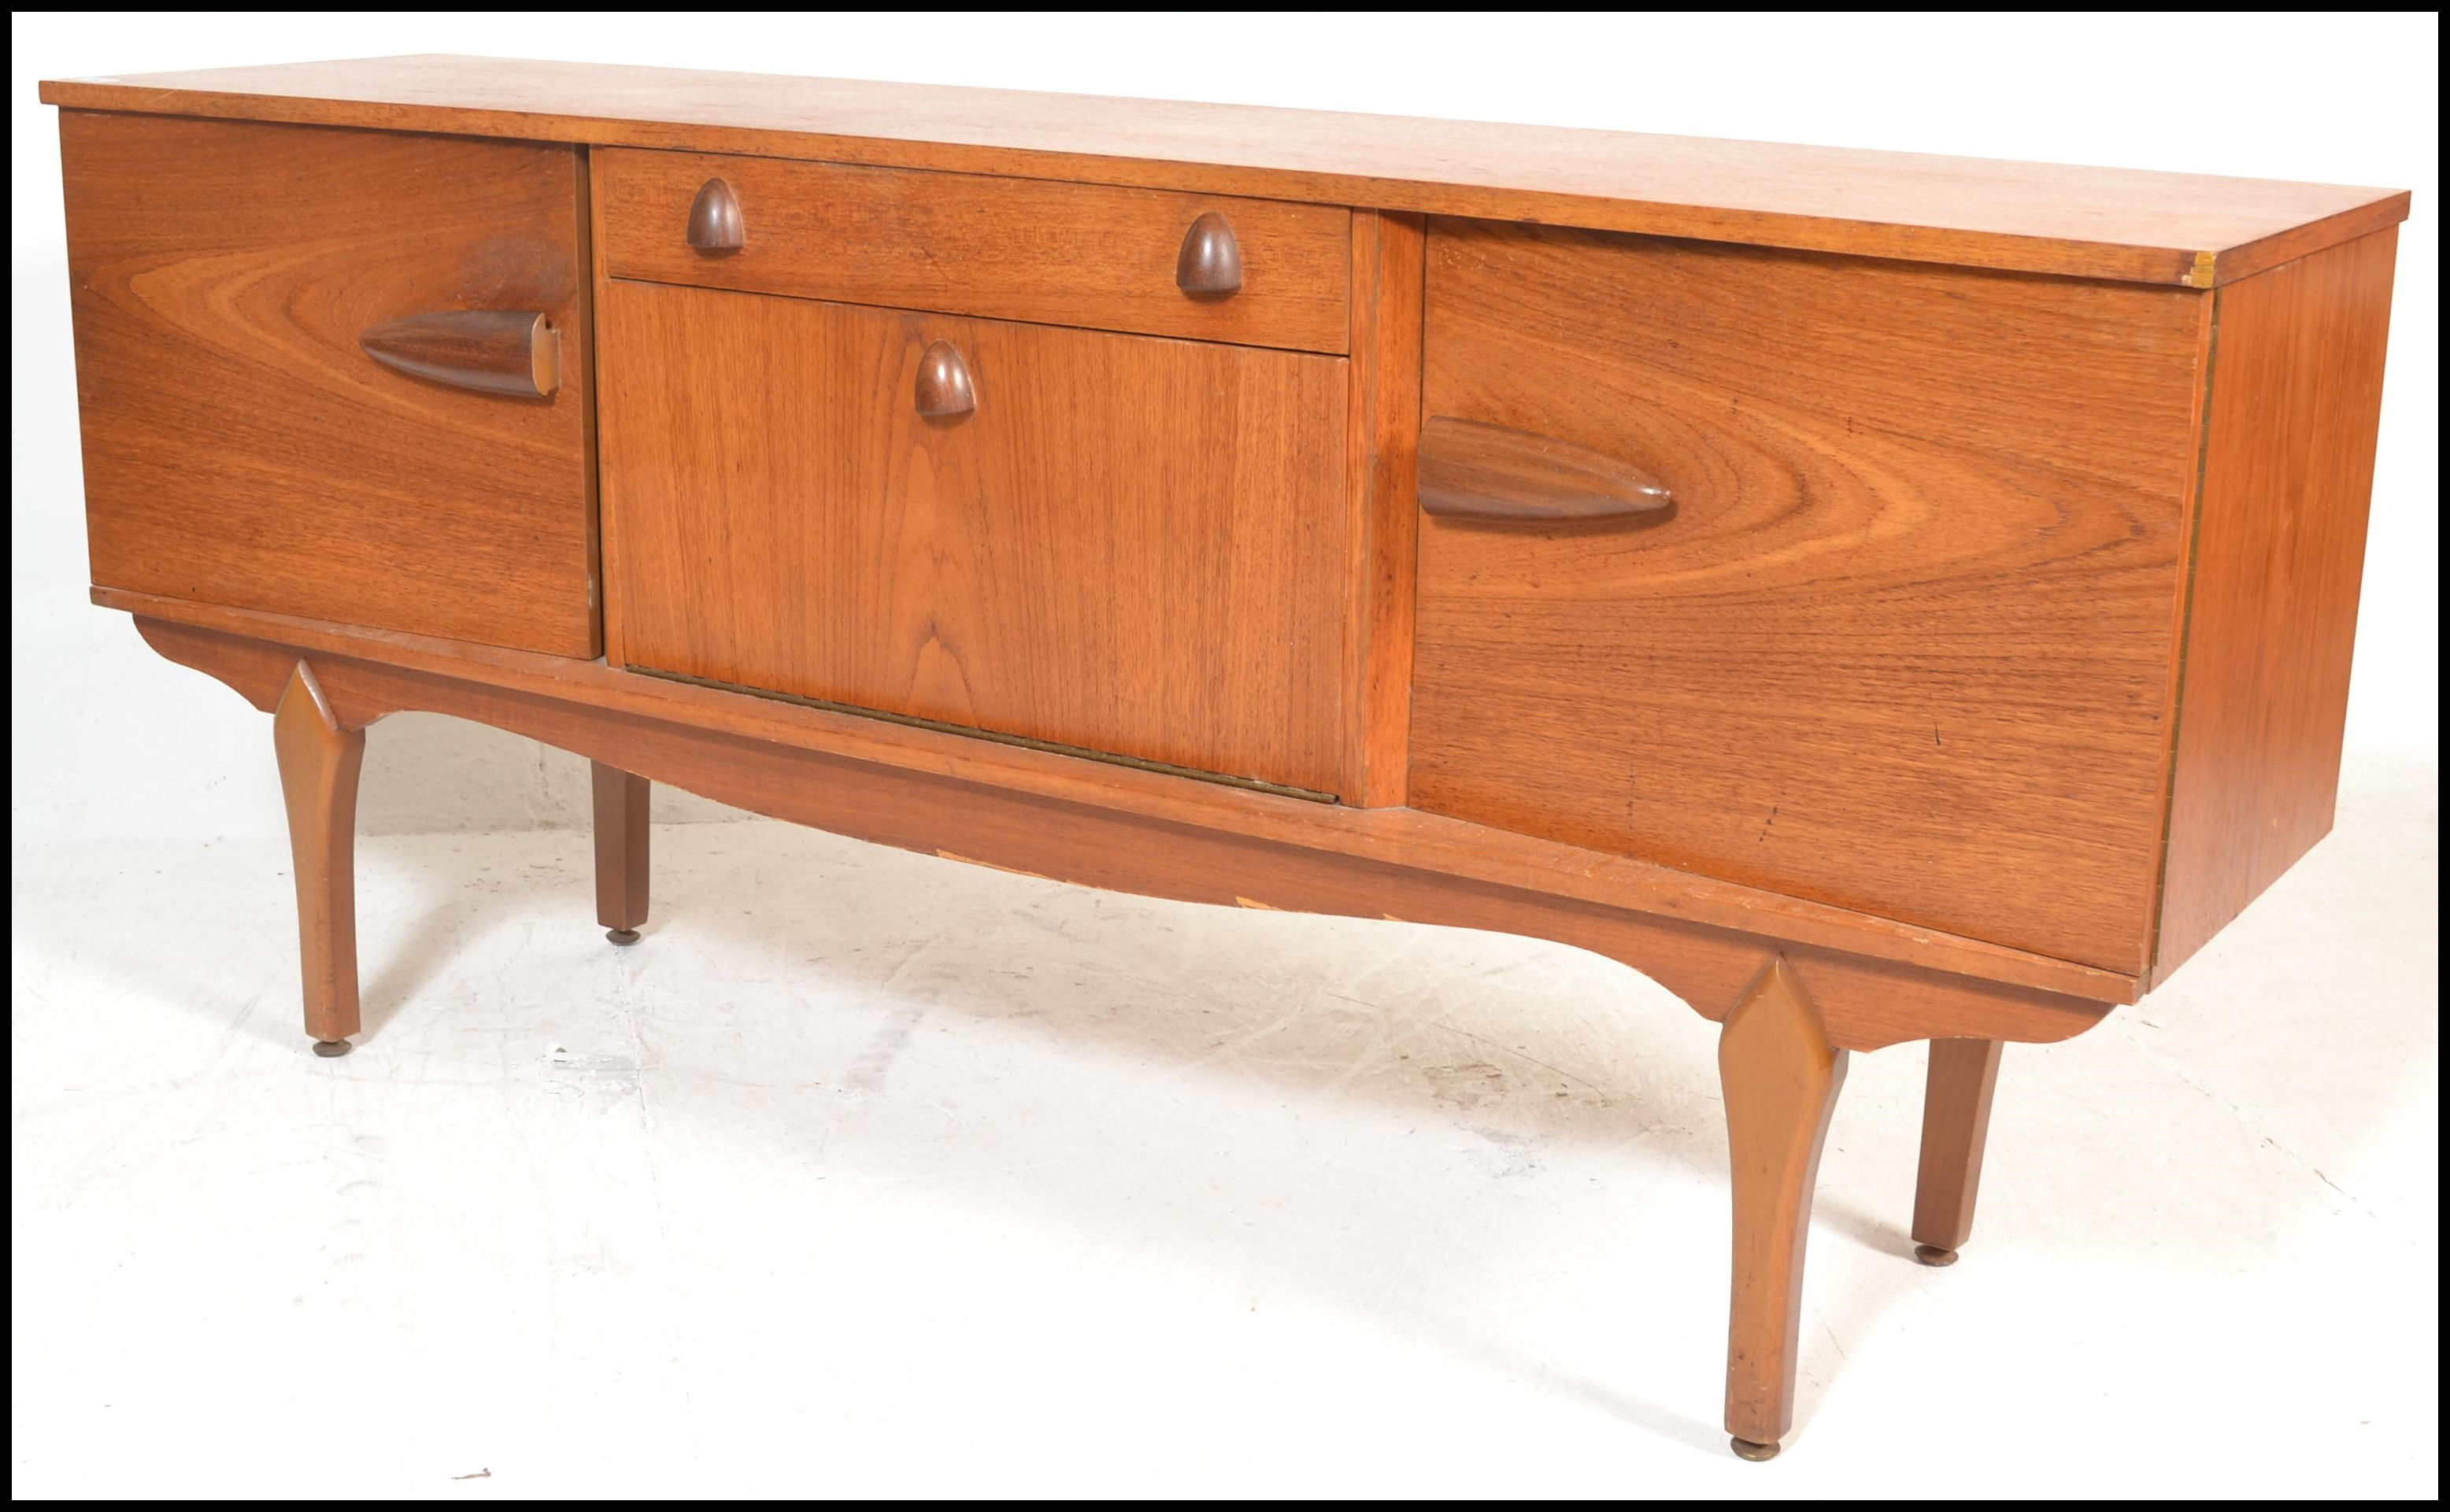 A vintage mid 20th century teak wood sideboard having a central drop down bar compartment with - Image 3 of 6